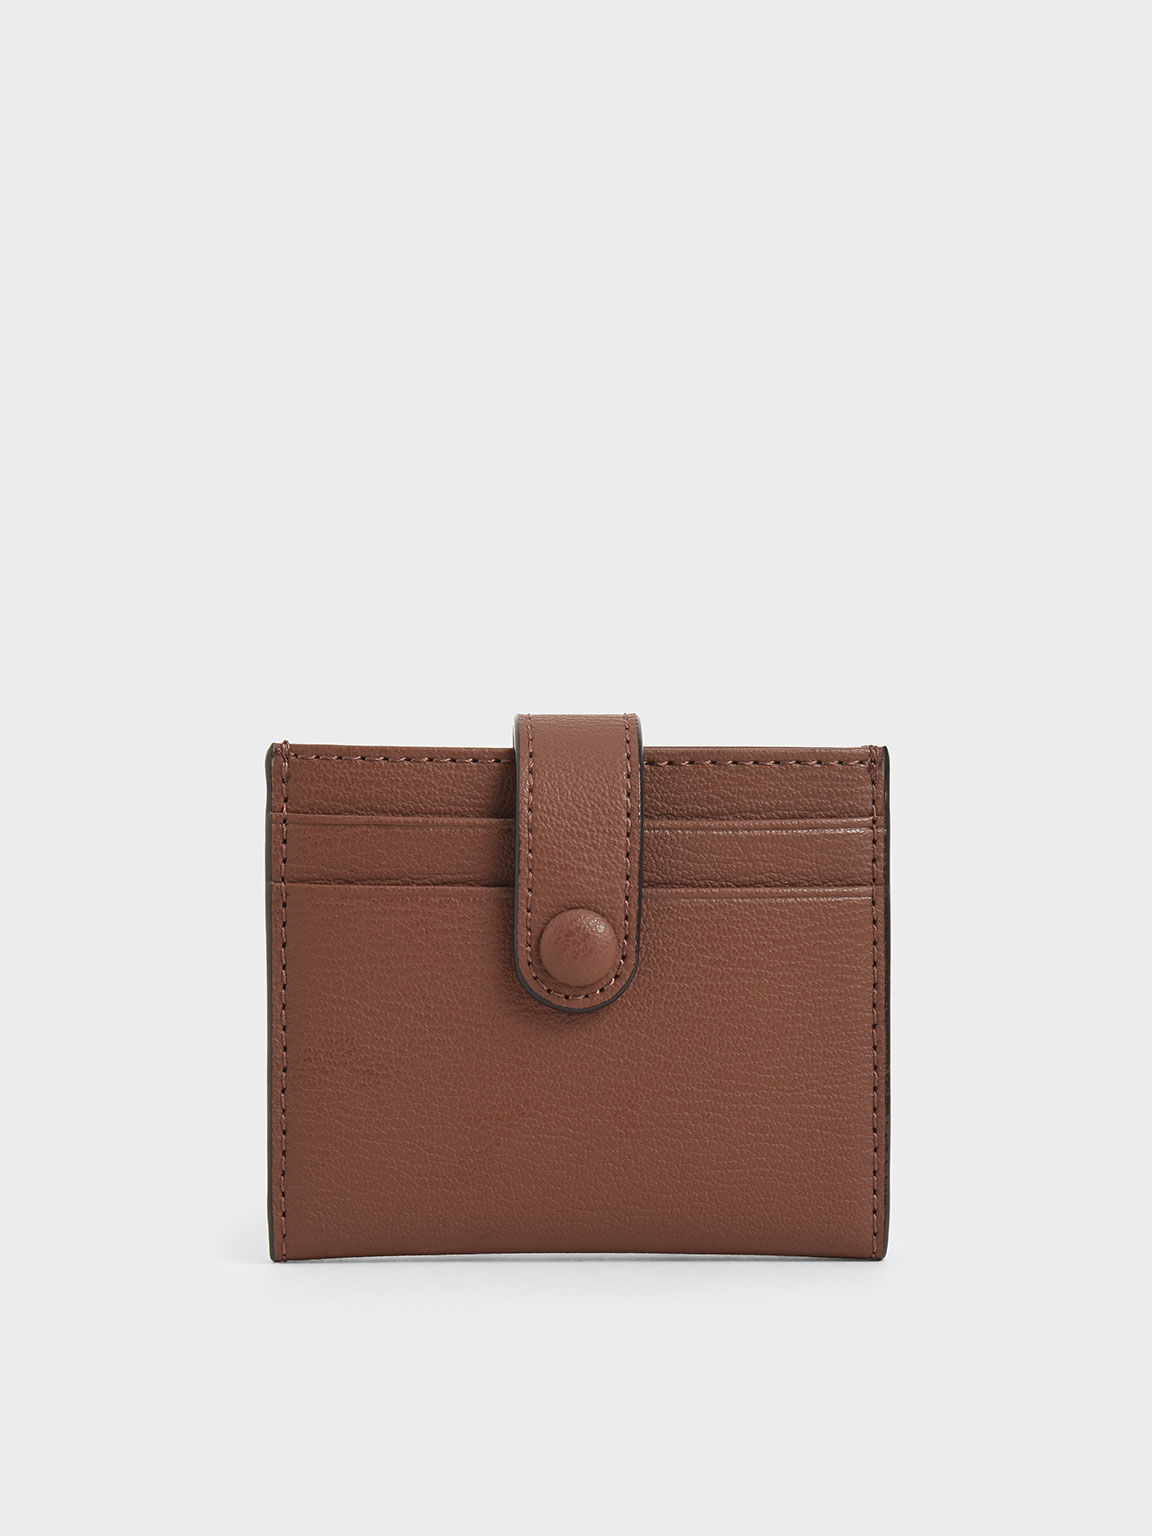 Women's Wallets | Shop Exclusive Styles - CHARLES & KEITH SG